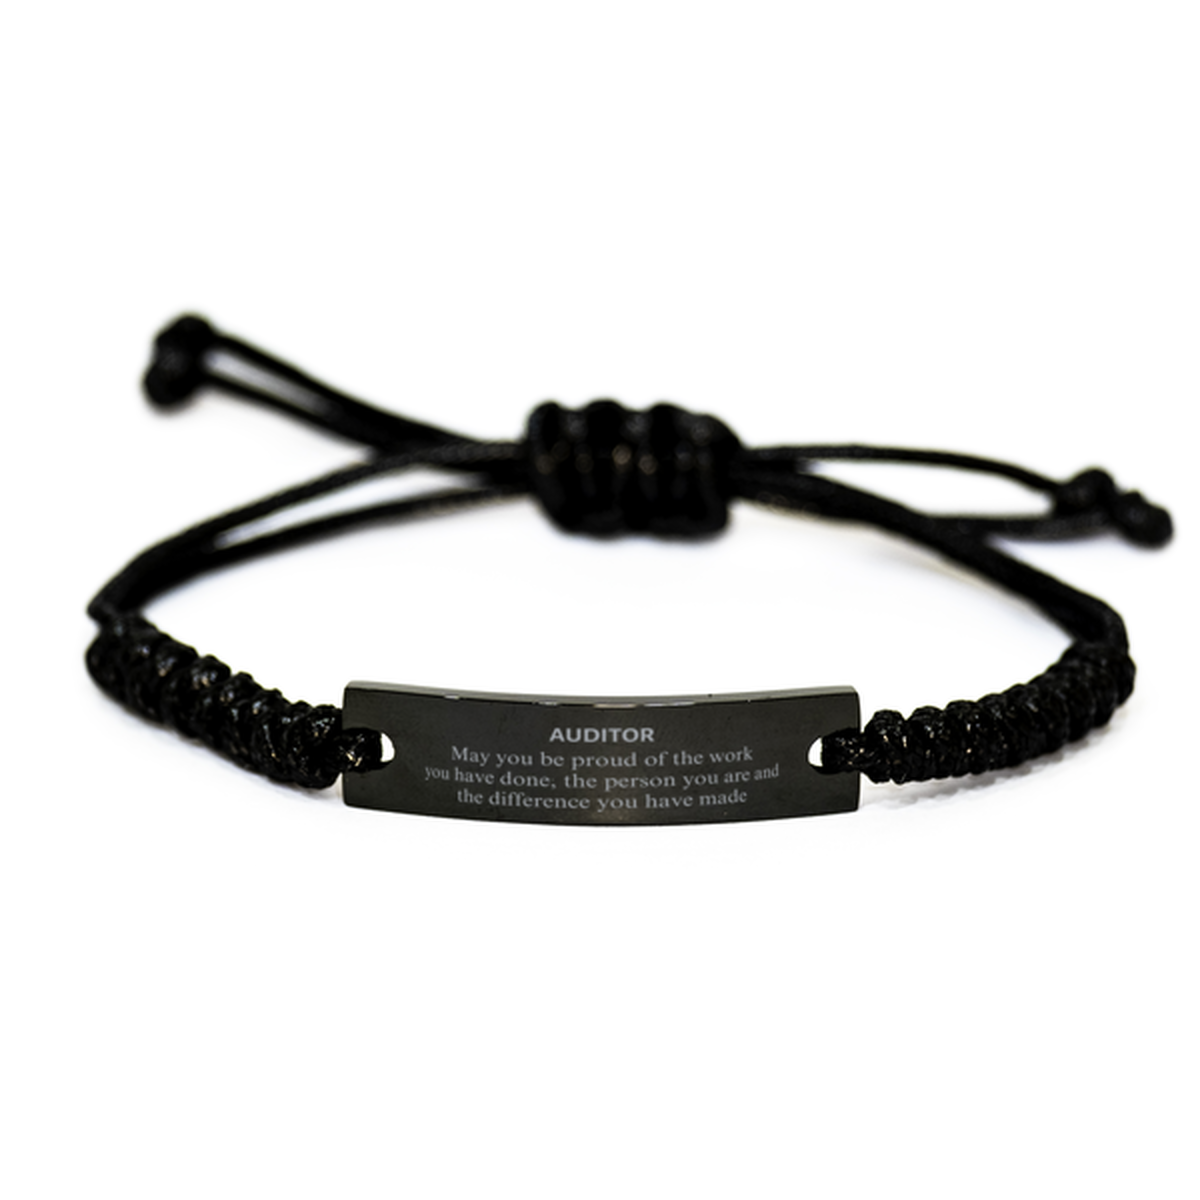 Auditor May you be proud of the work you have done, Retirement Auditor Black Rope Bracelet for Colleague Appreciation Gifts Amazing for Auditor